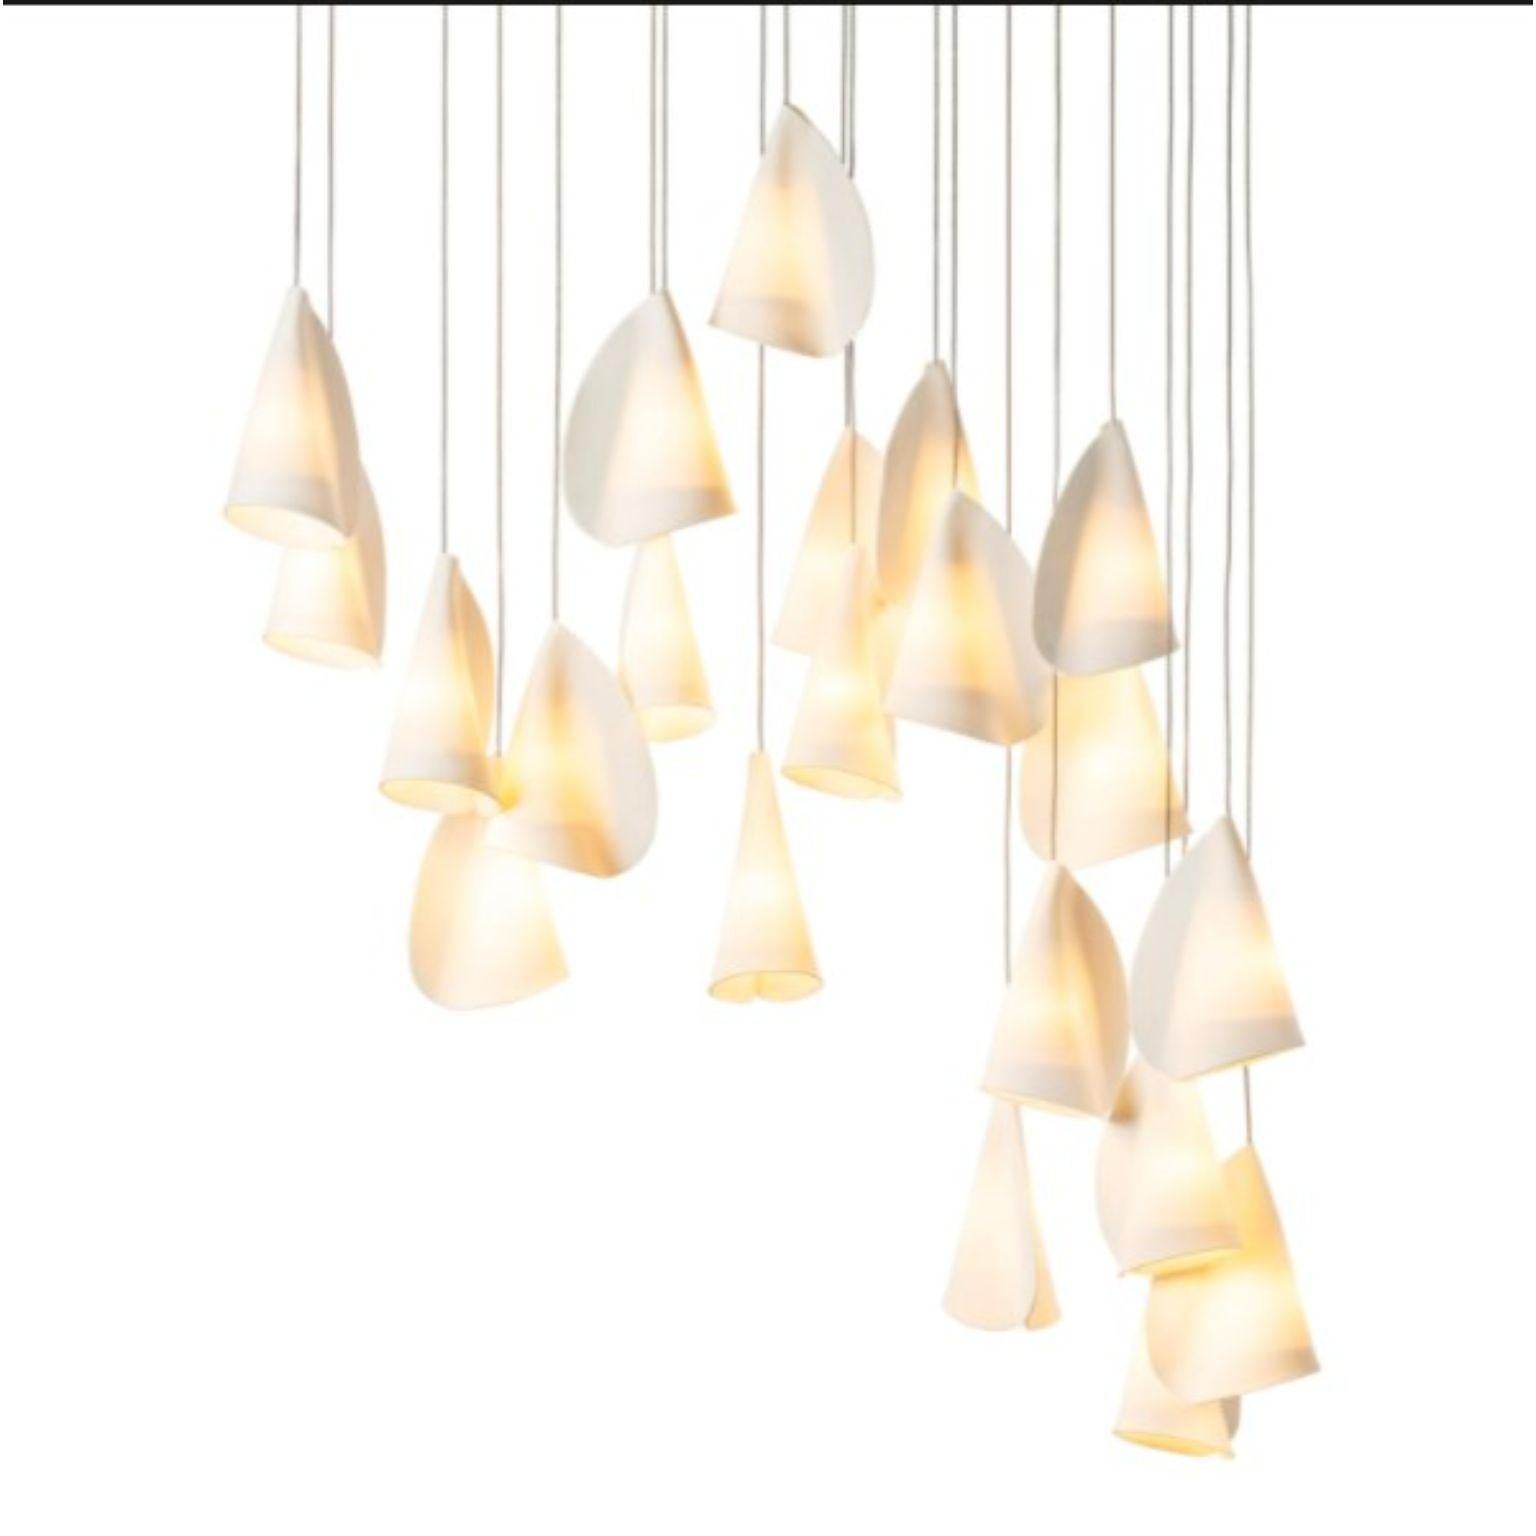 21.21 Pendant by Bocci
Dimensions: D85 x W28.4 x H300 cm
Materials: white powder, coated square canopy
Weight:18.6 kg
Also Available in different dimensions.

All our lamps can be wired according to each country. If sold to the USA it will be